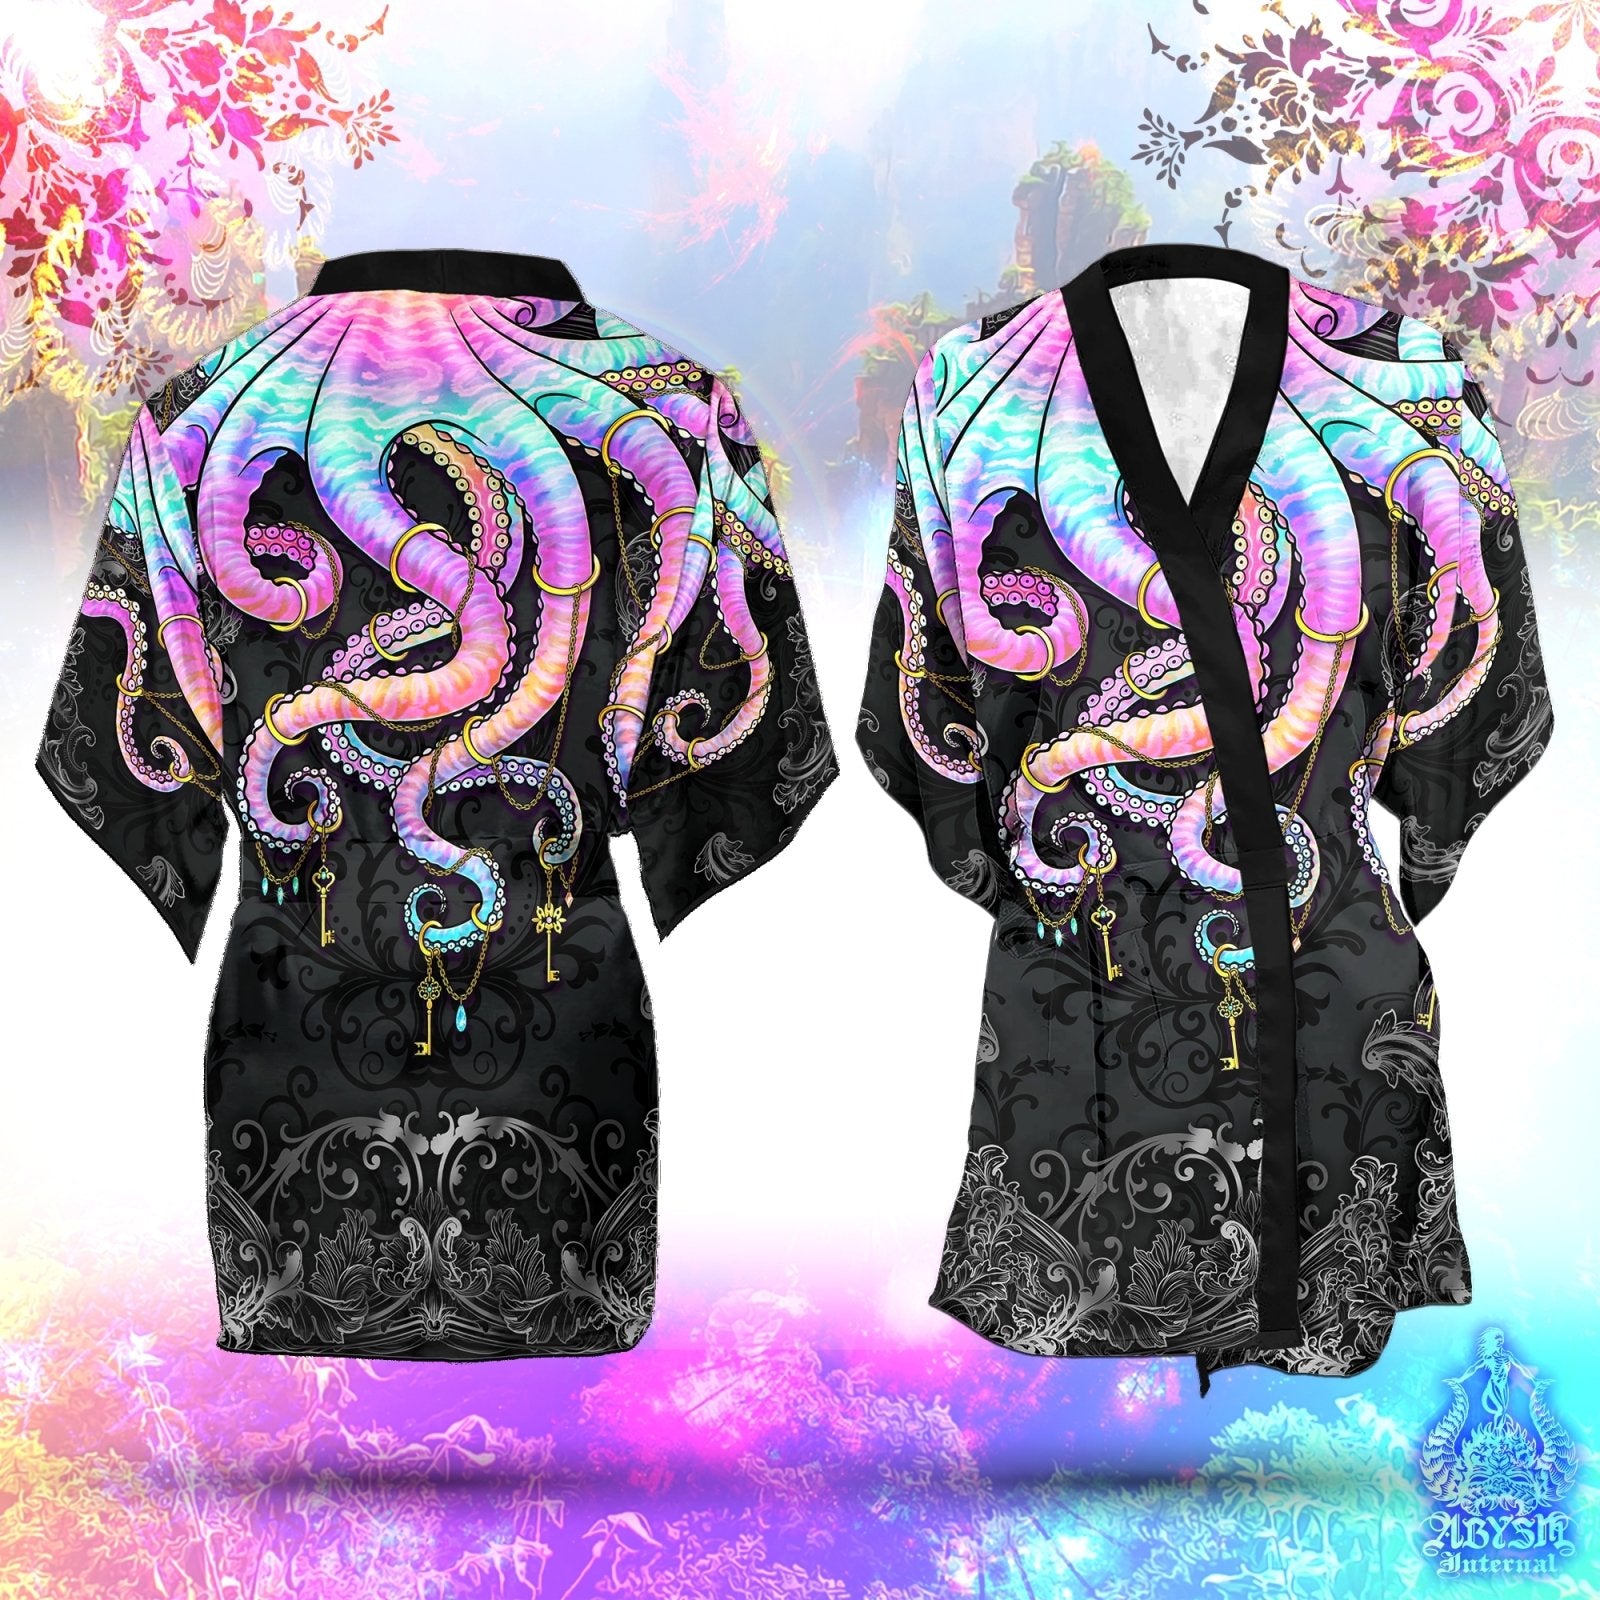 Beach Cover Up, Beach Rave Outfit, Octopus Party Kimono, Summer Festival Robe, Indie and Alternative Clothing, Unisex - Pastel Punk Dark - Abysm Internal